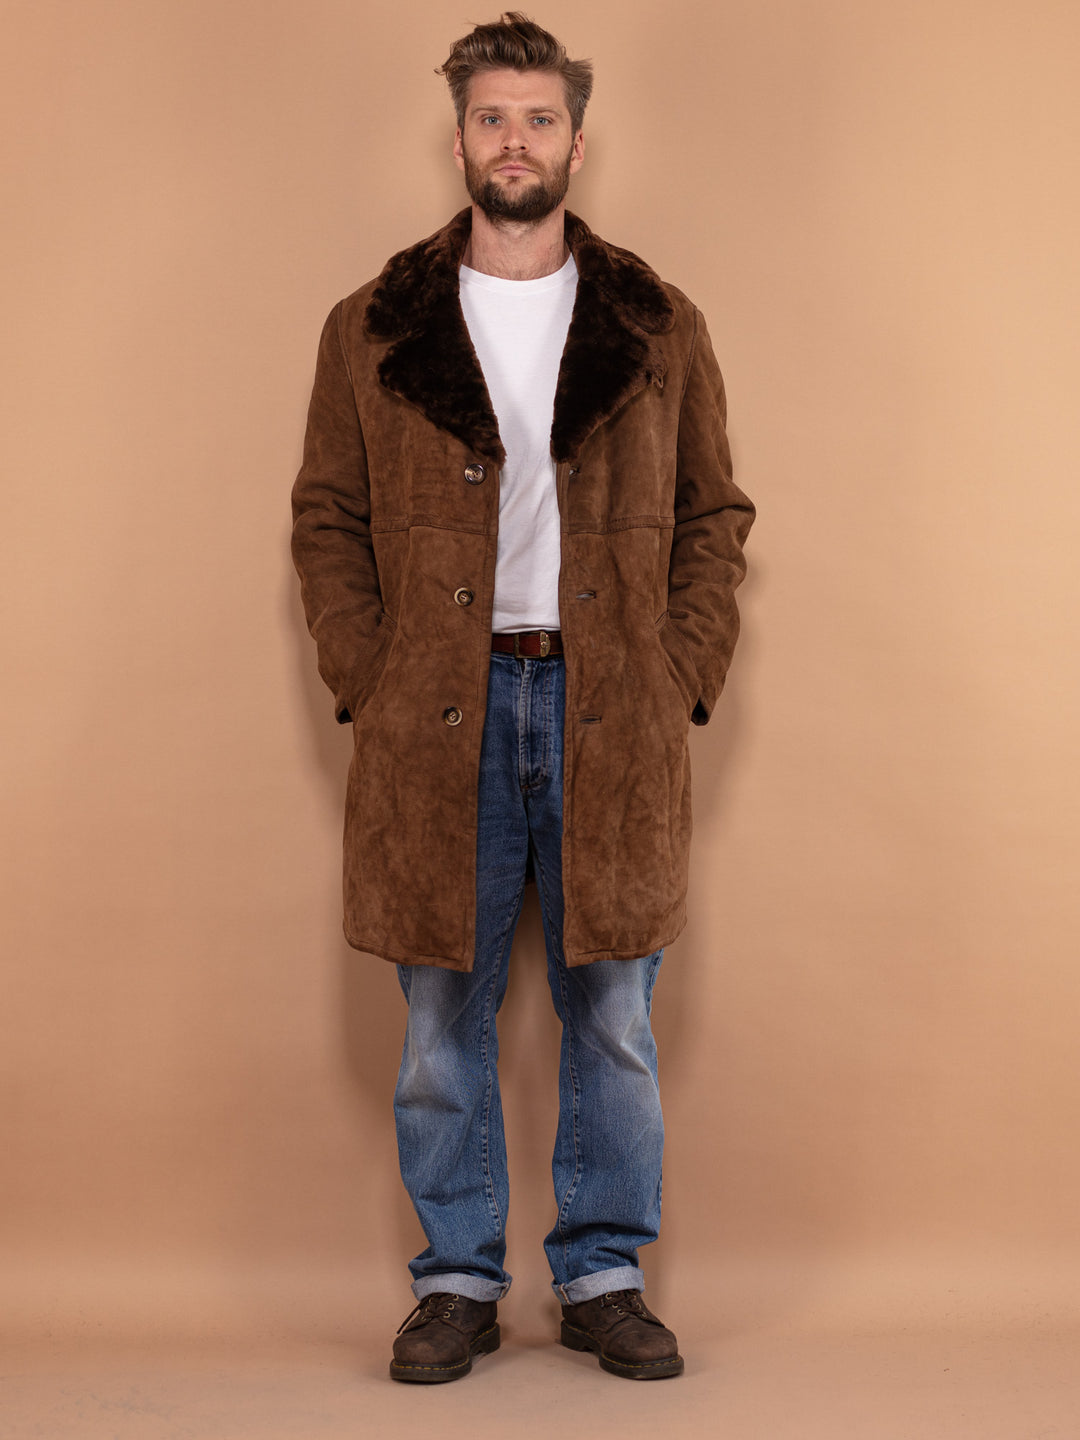 Men Shearling Coat 70's, Size Large Worn In Shearling Coat, Retro Leather Coat, Brown Suede Overcoat, Boho Winter Coat, Old Fashioned Coat